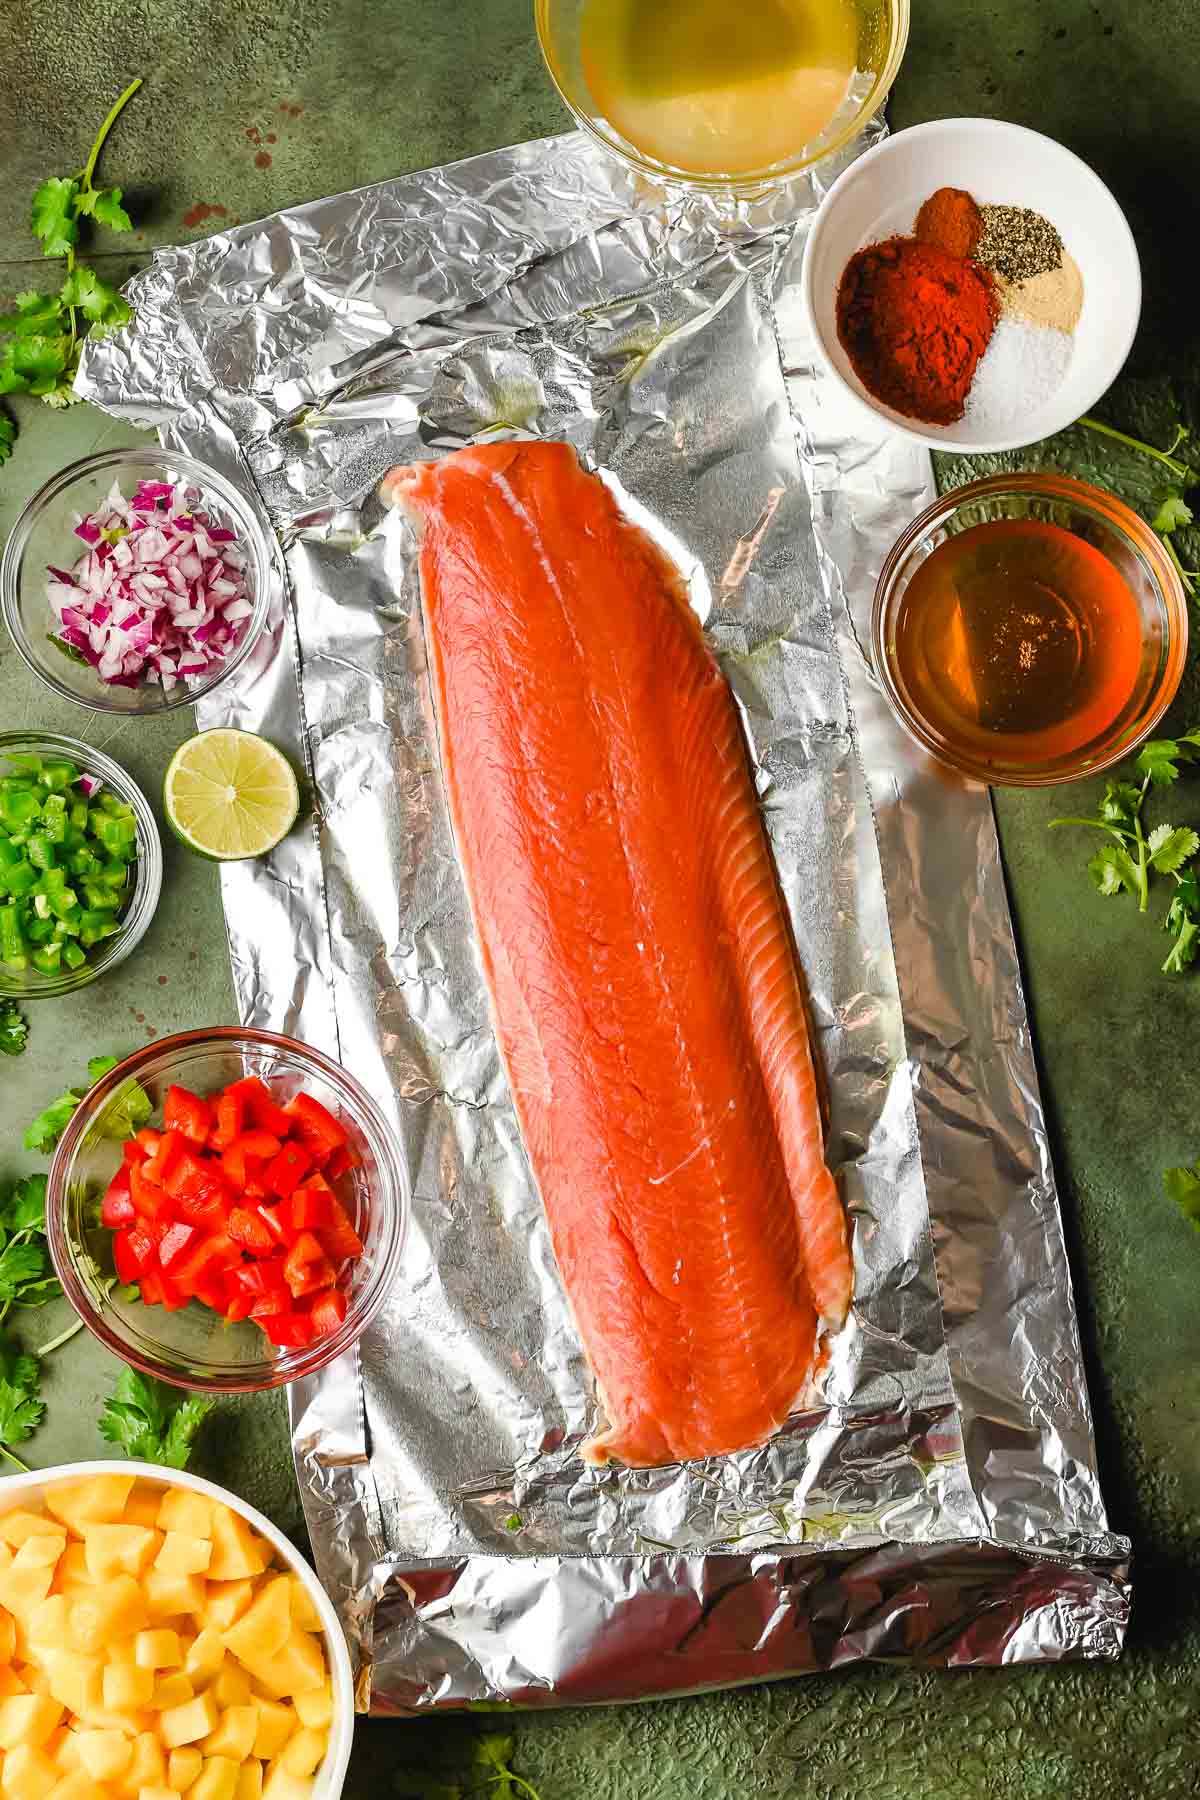 Raw salmon fillet shown on a large piece of foil, with other ingredients around it.